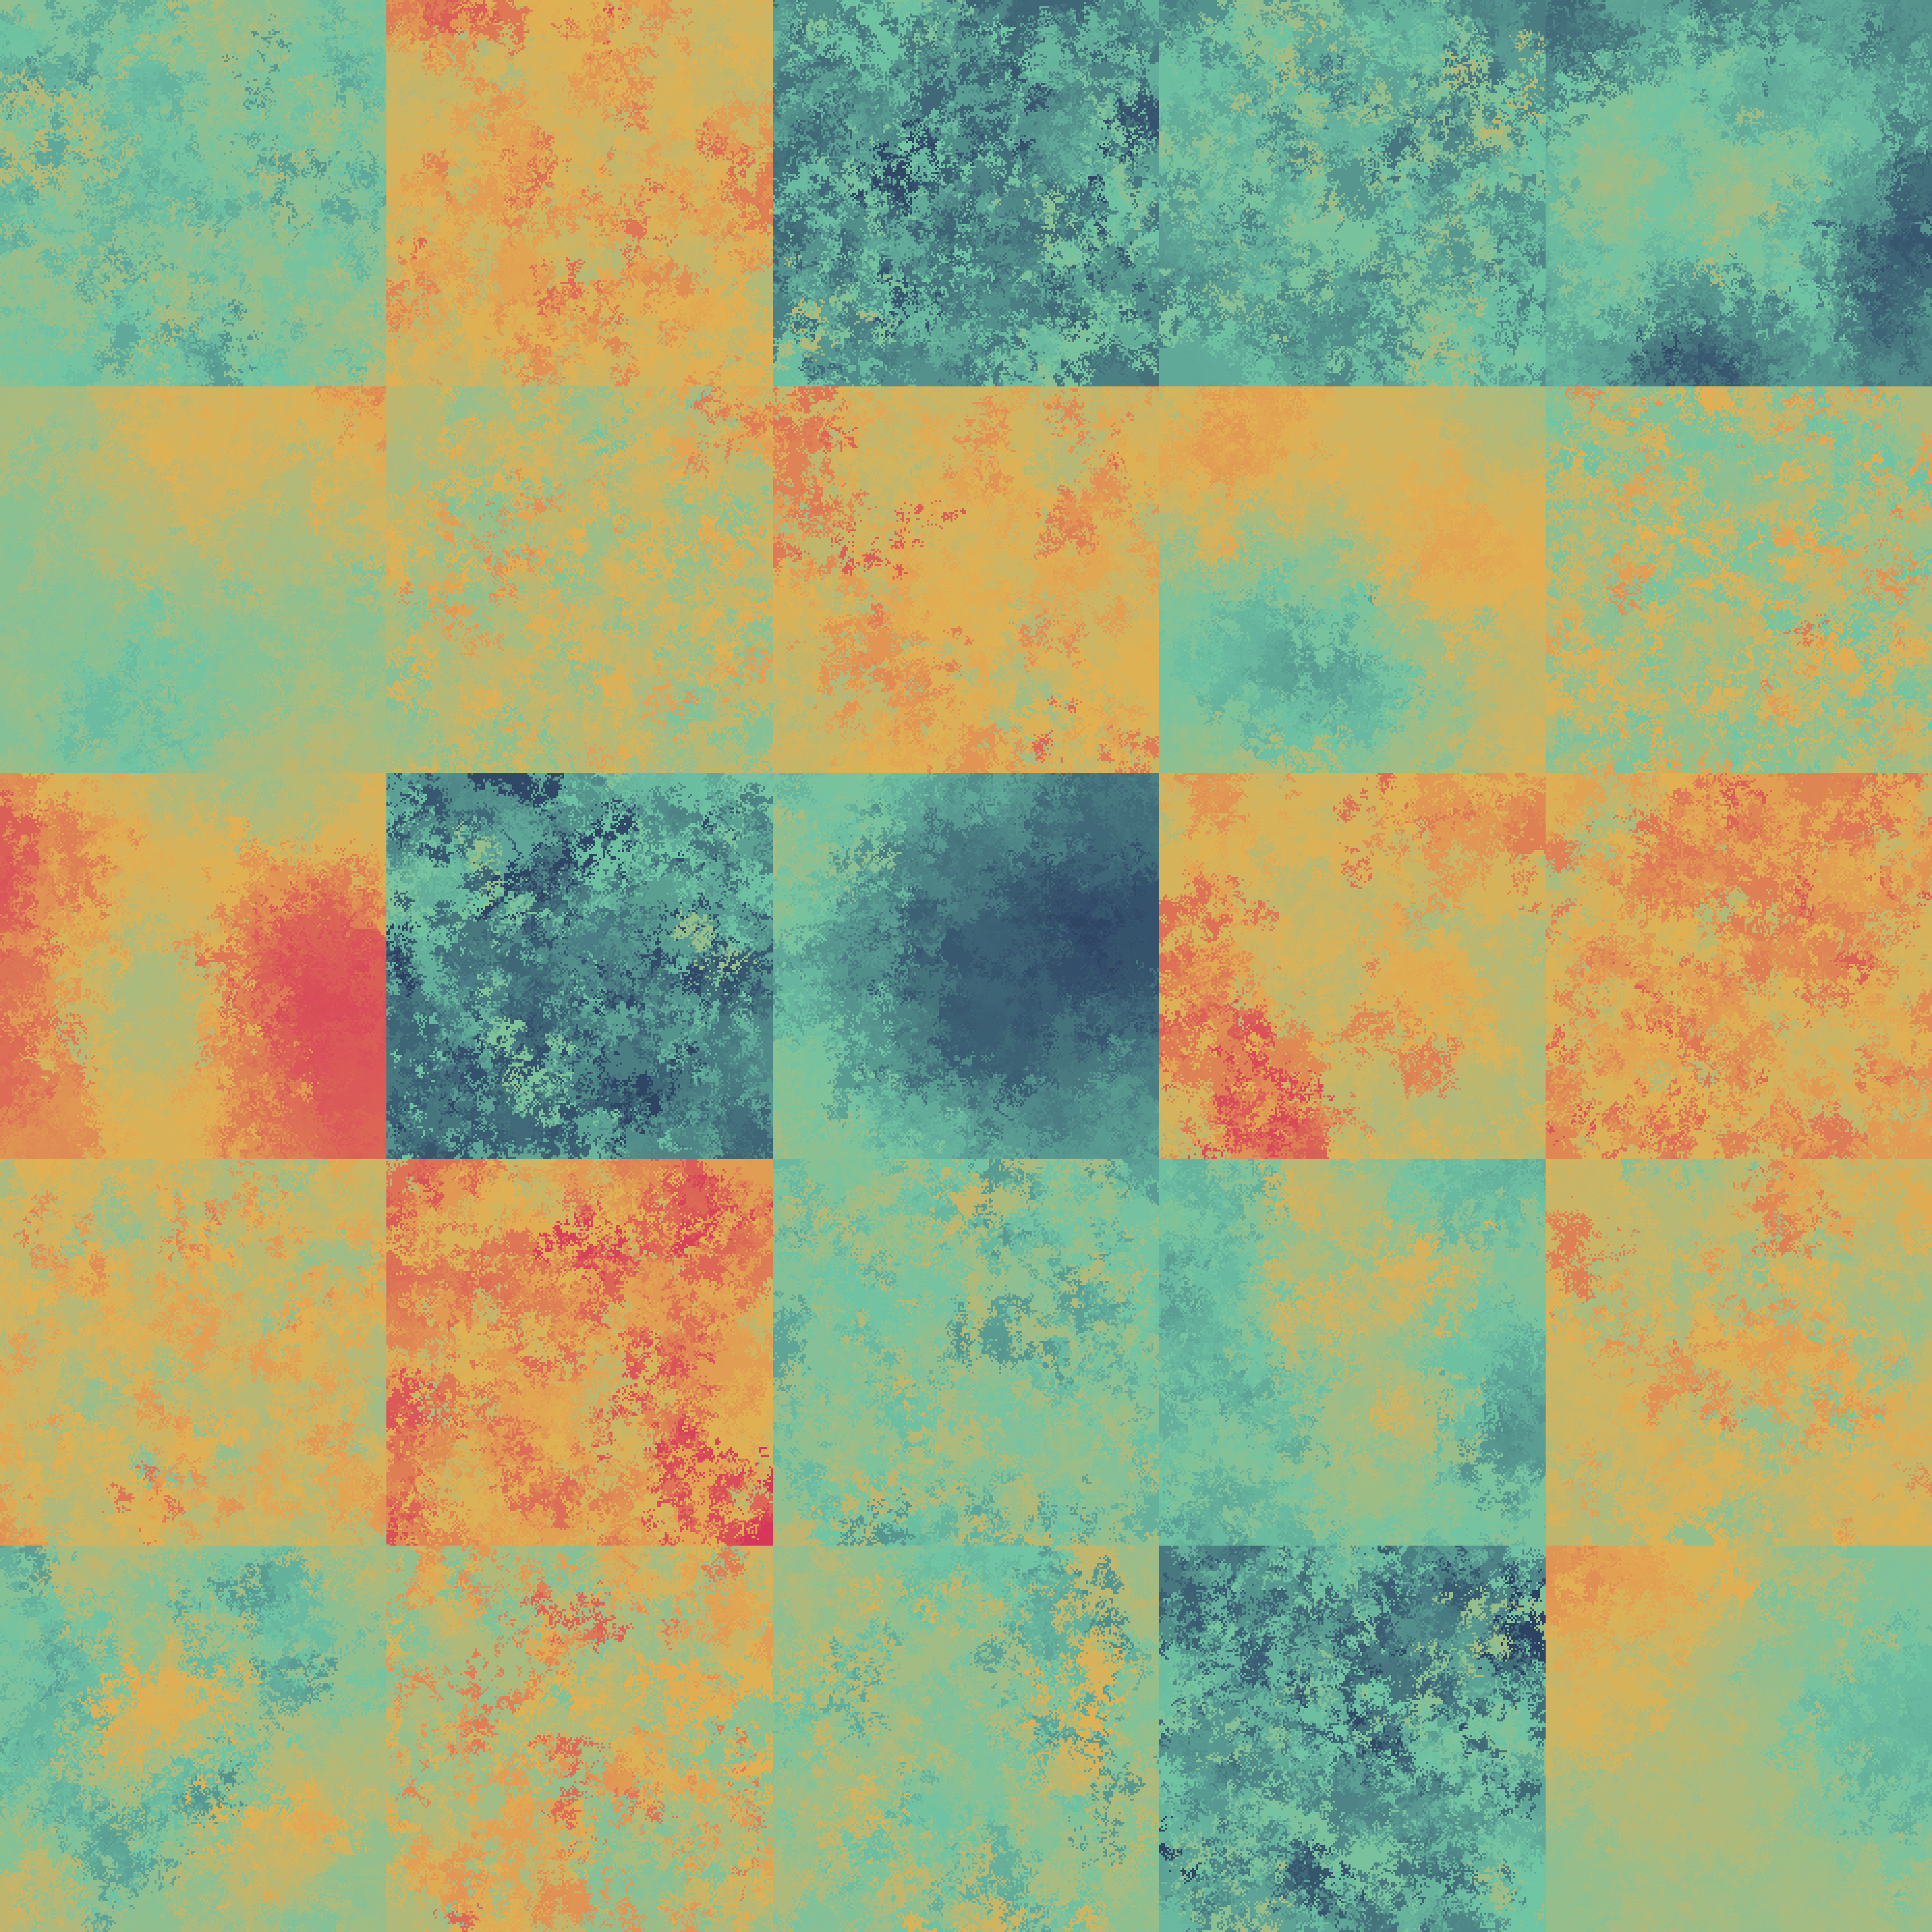 A heatmap-like grid of tiles with blue or red textures.